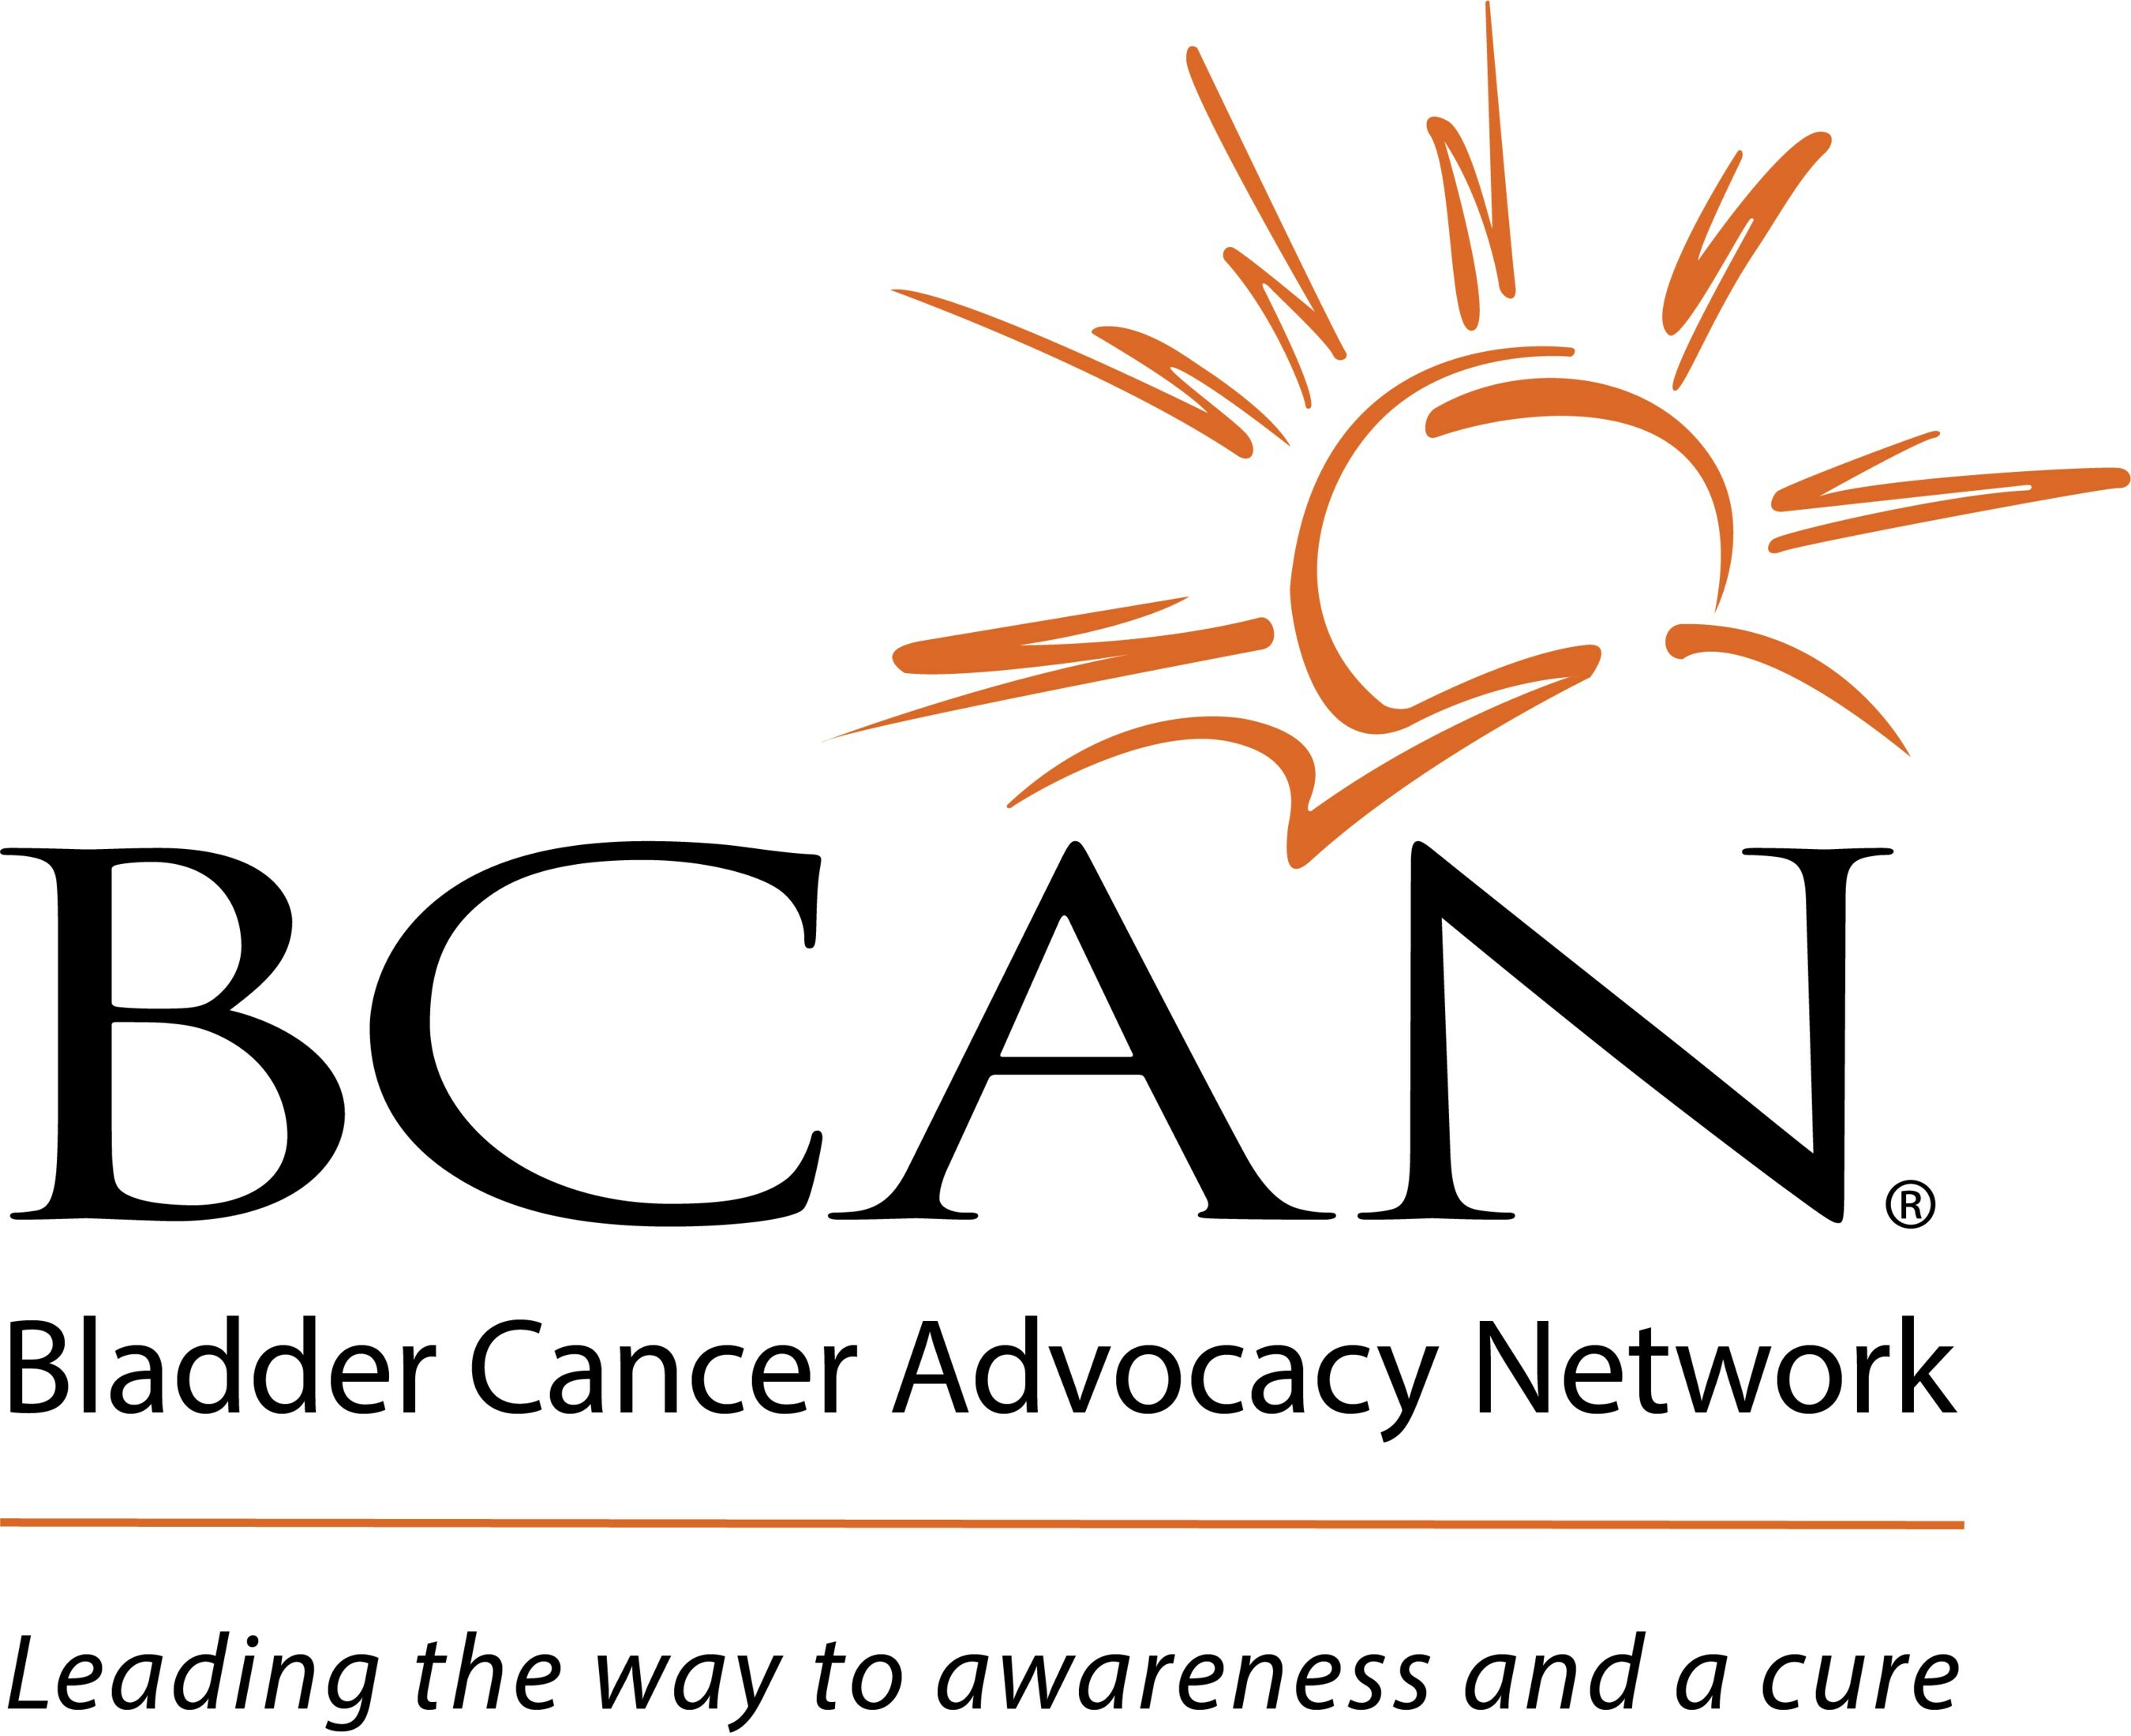 The Bladder Cancer Advocacy Network (BCAN) is a community of patients, caregivers, survivors, advocates, medical and research professionals united in support of people impacted by bladder cancer.